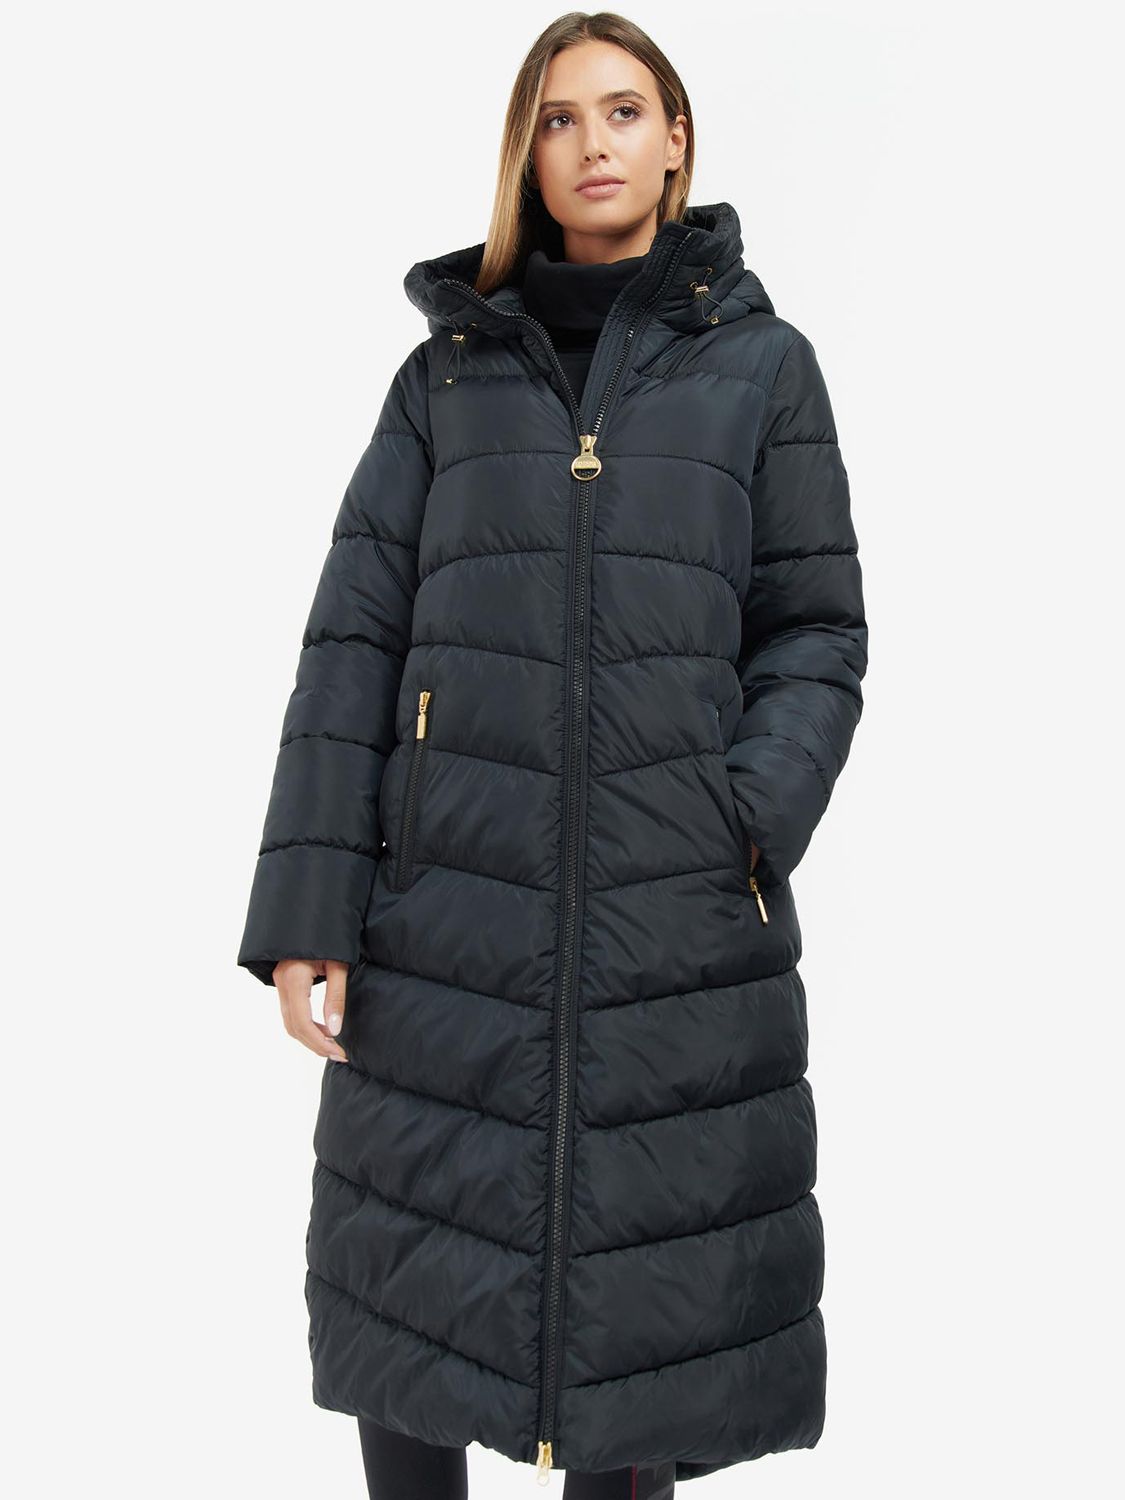 Barbour International Glacia Quilted Long Coat, Black